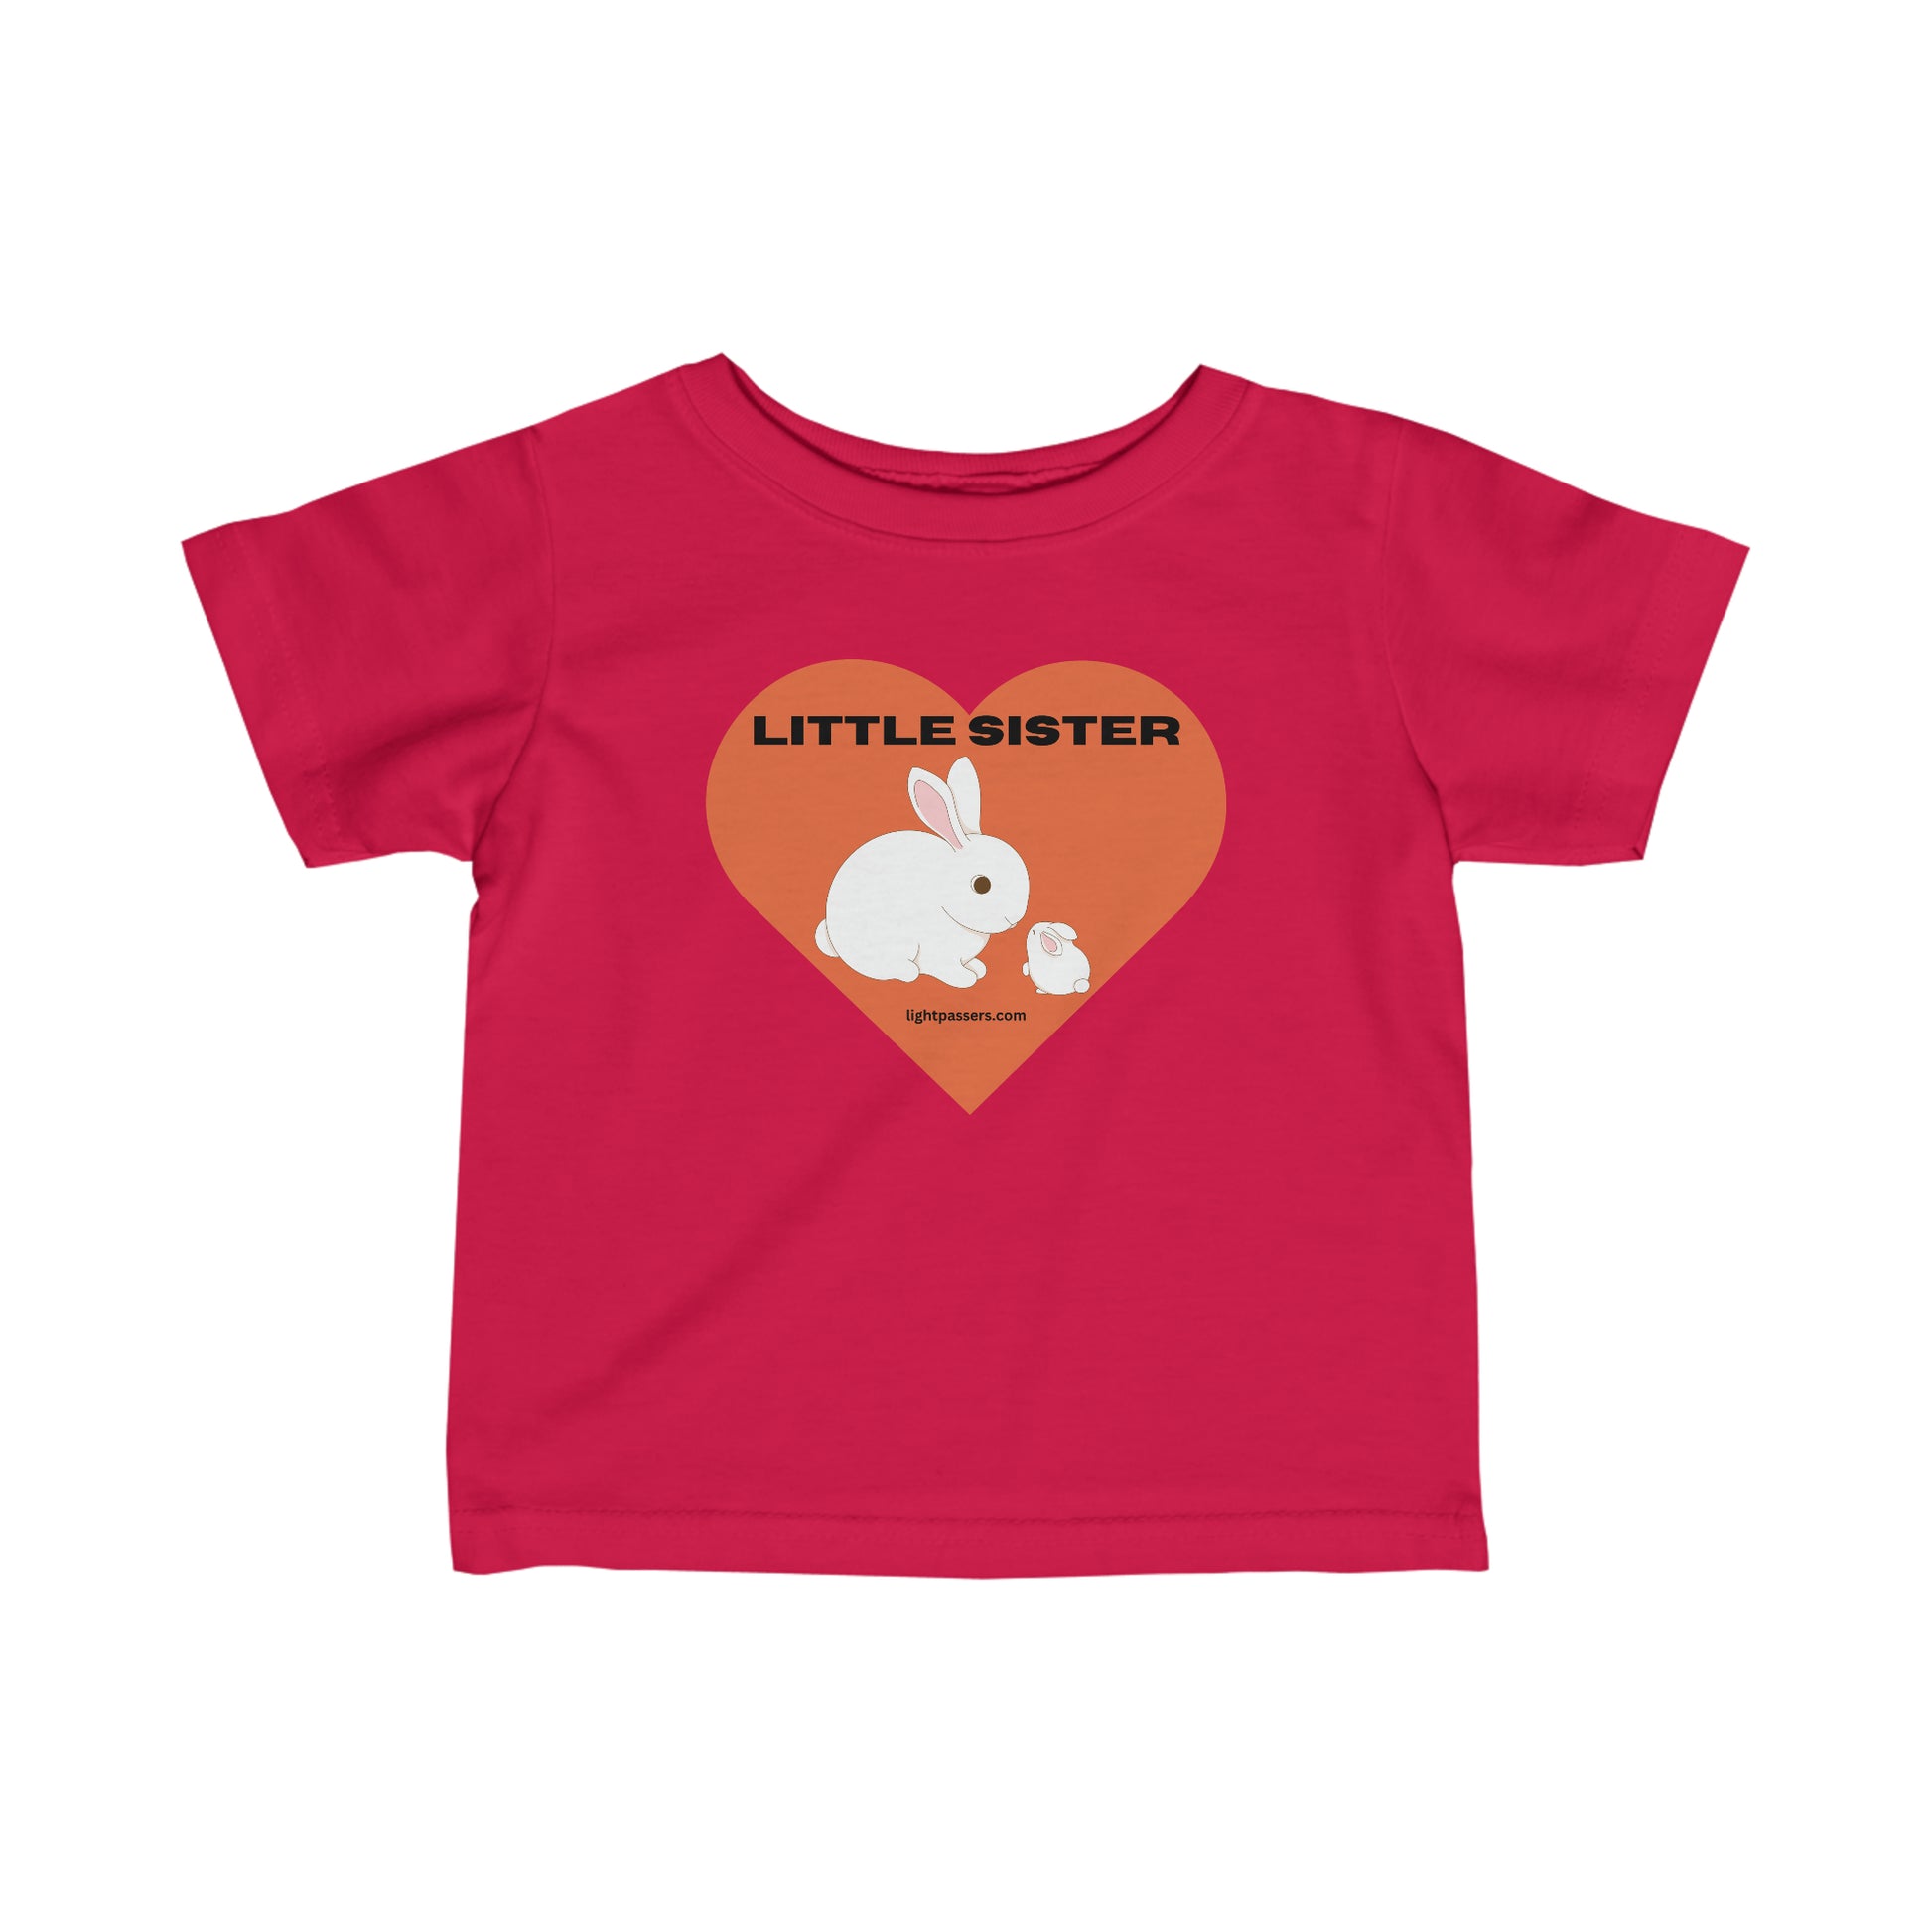 A pink infant tee with a cute rabbit and heart design, featuring side seams for shape support, ribbed knitting for durability, and taped shoulders for comfort. Little Sister Baby T-shirts for younglings.